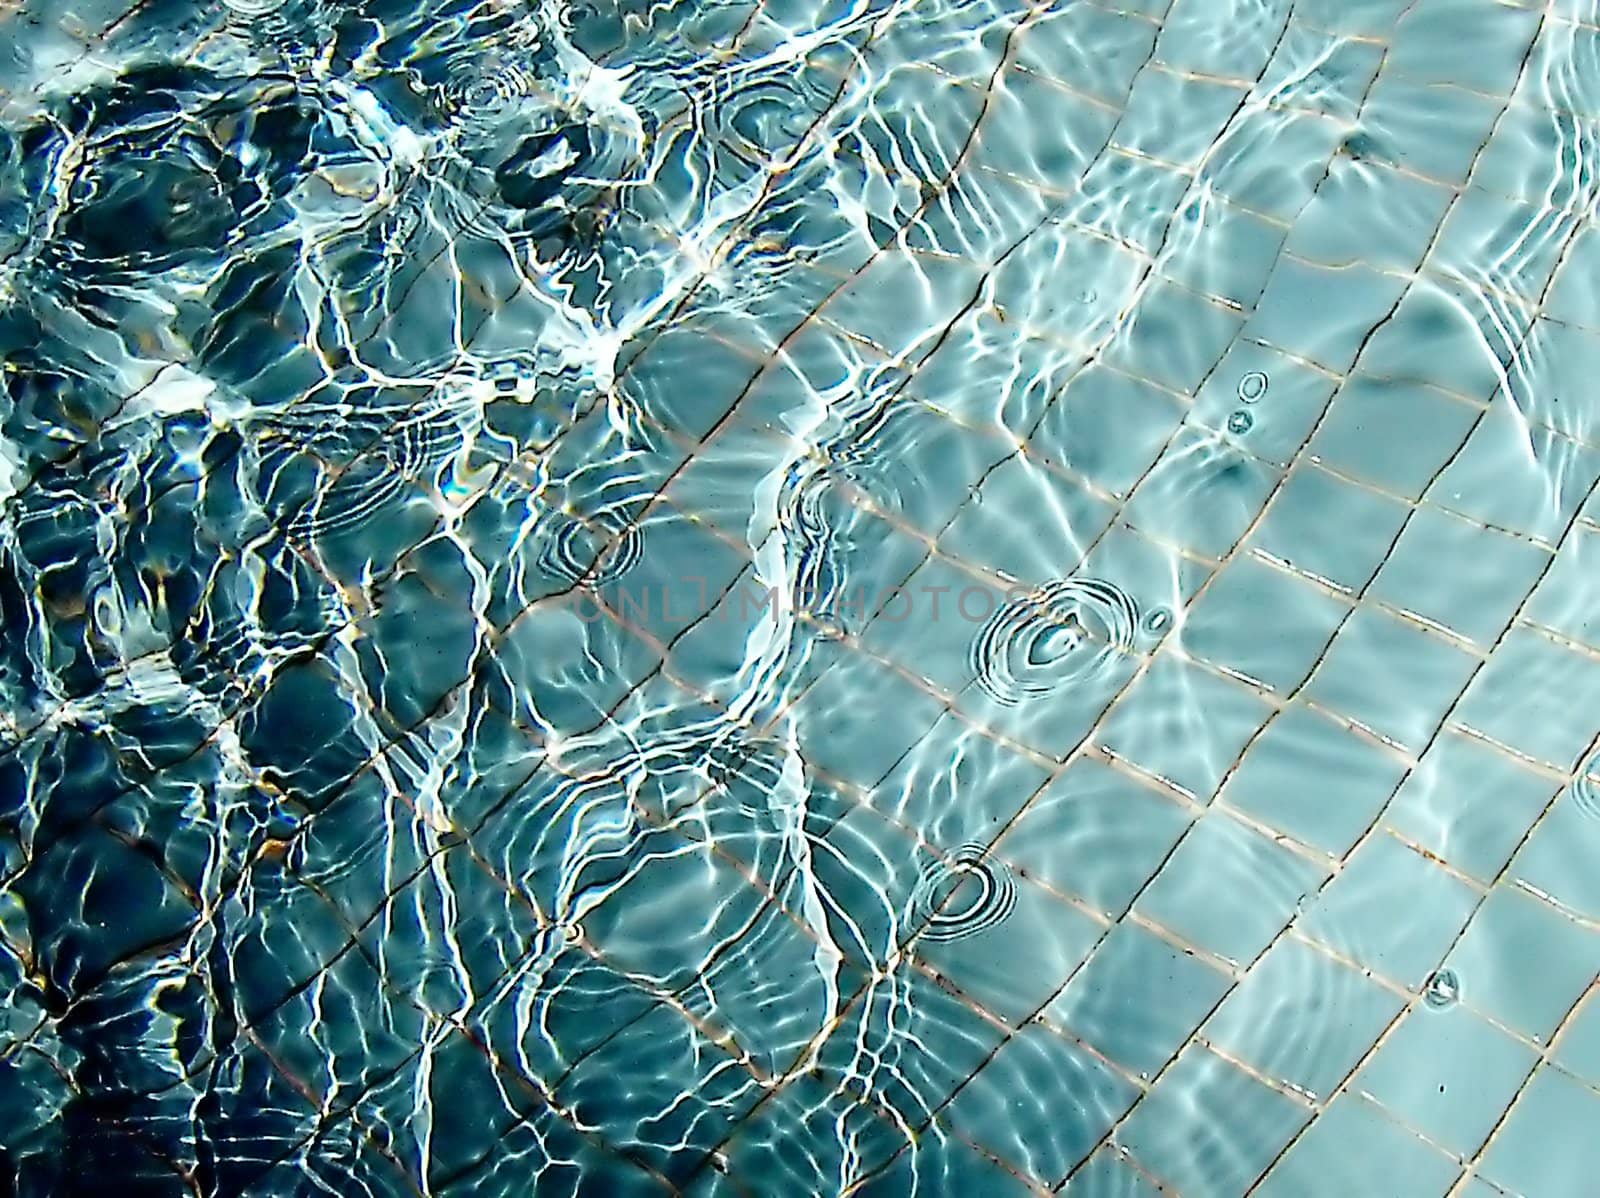 Waves and bubbles in a fountain pool.